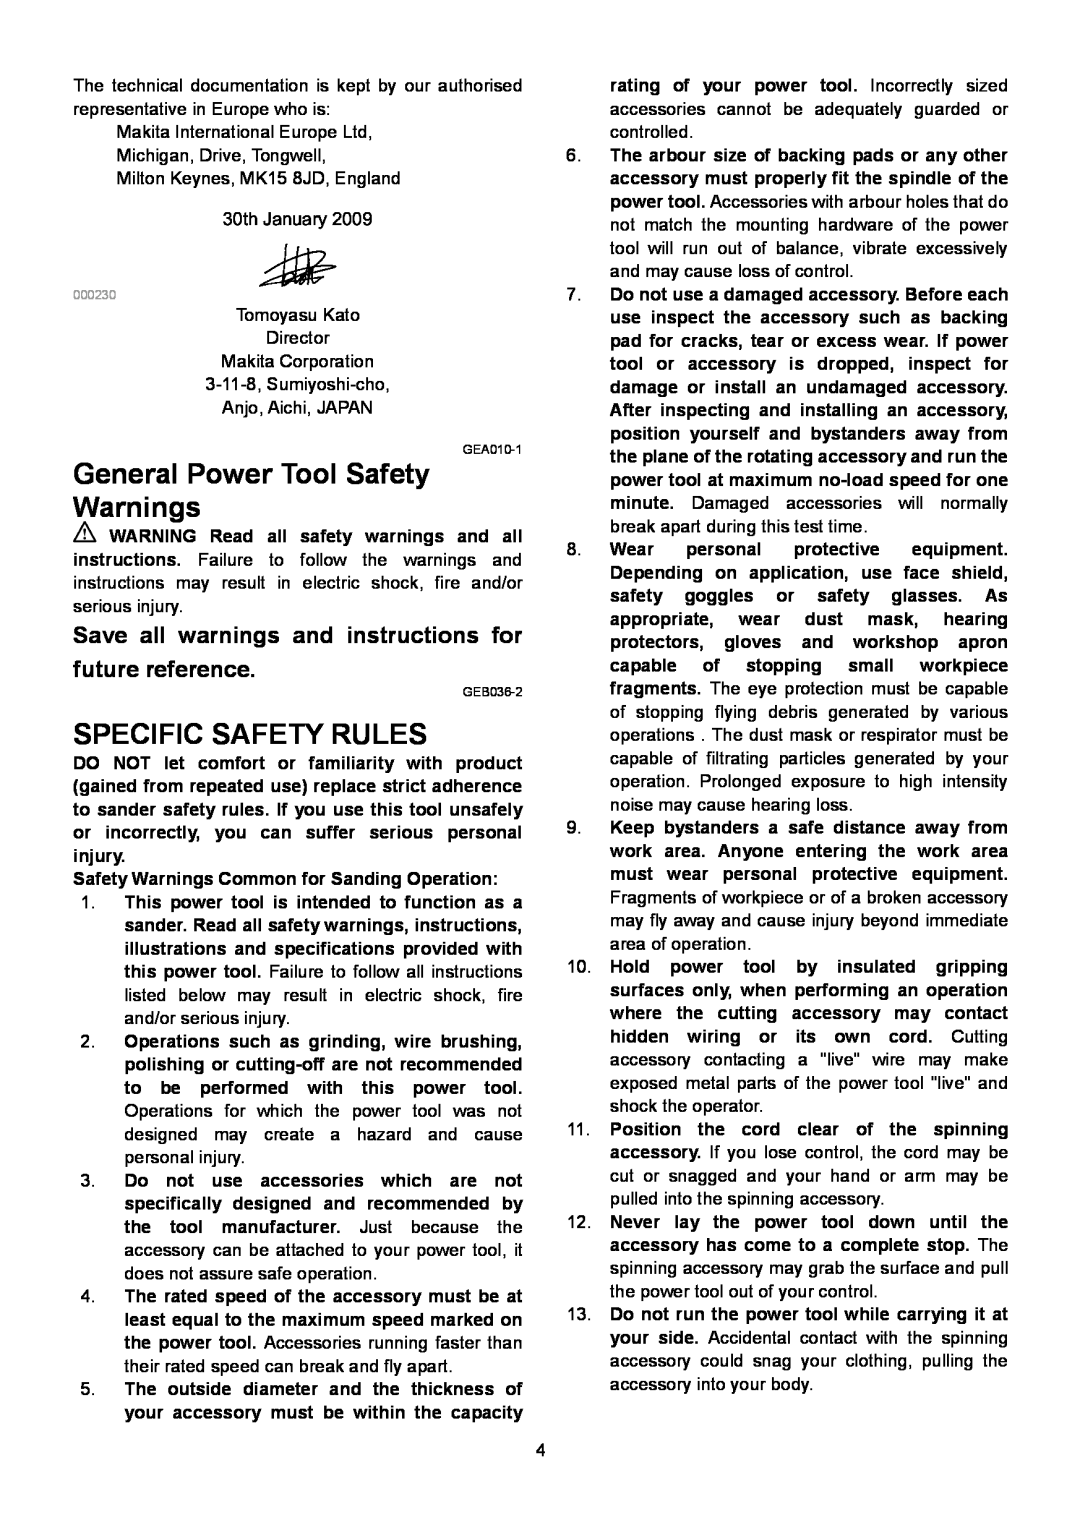 Makita SA7000C instruction manual General Power Tool Safety Warnings, Specific Safety Rules 